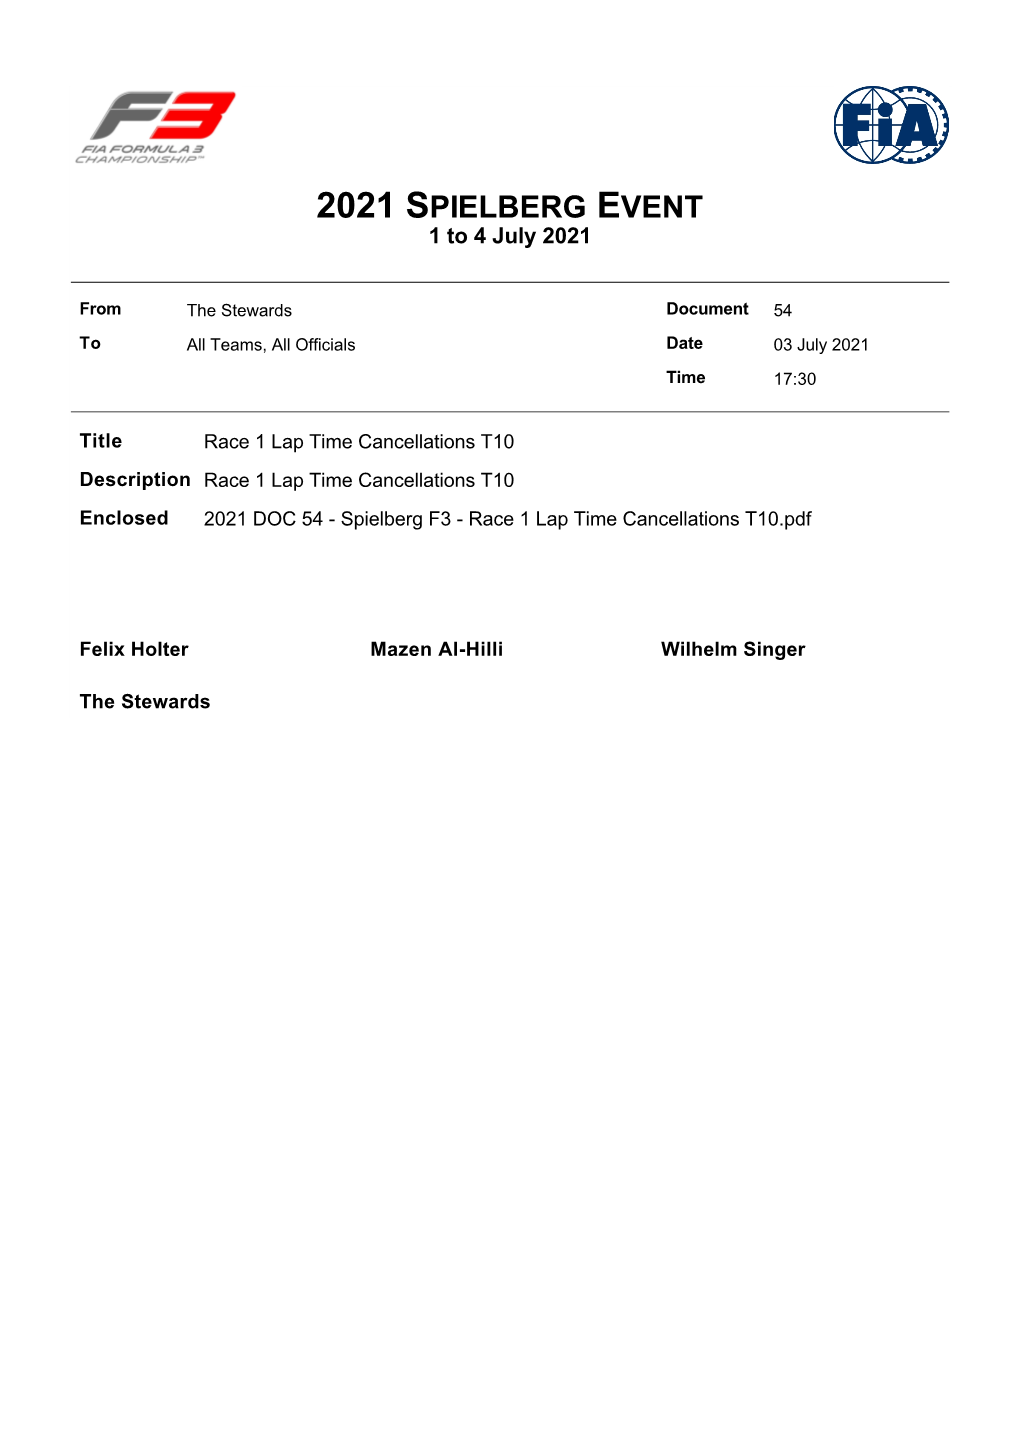 Race 1 Lap Time Cancellations T10 Published on 03.07.21 17:31